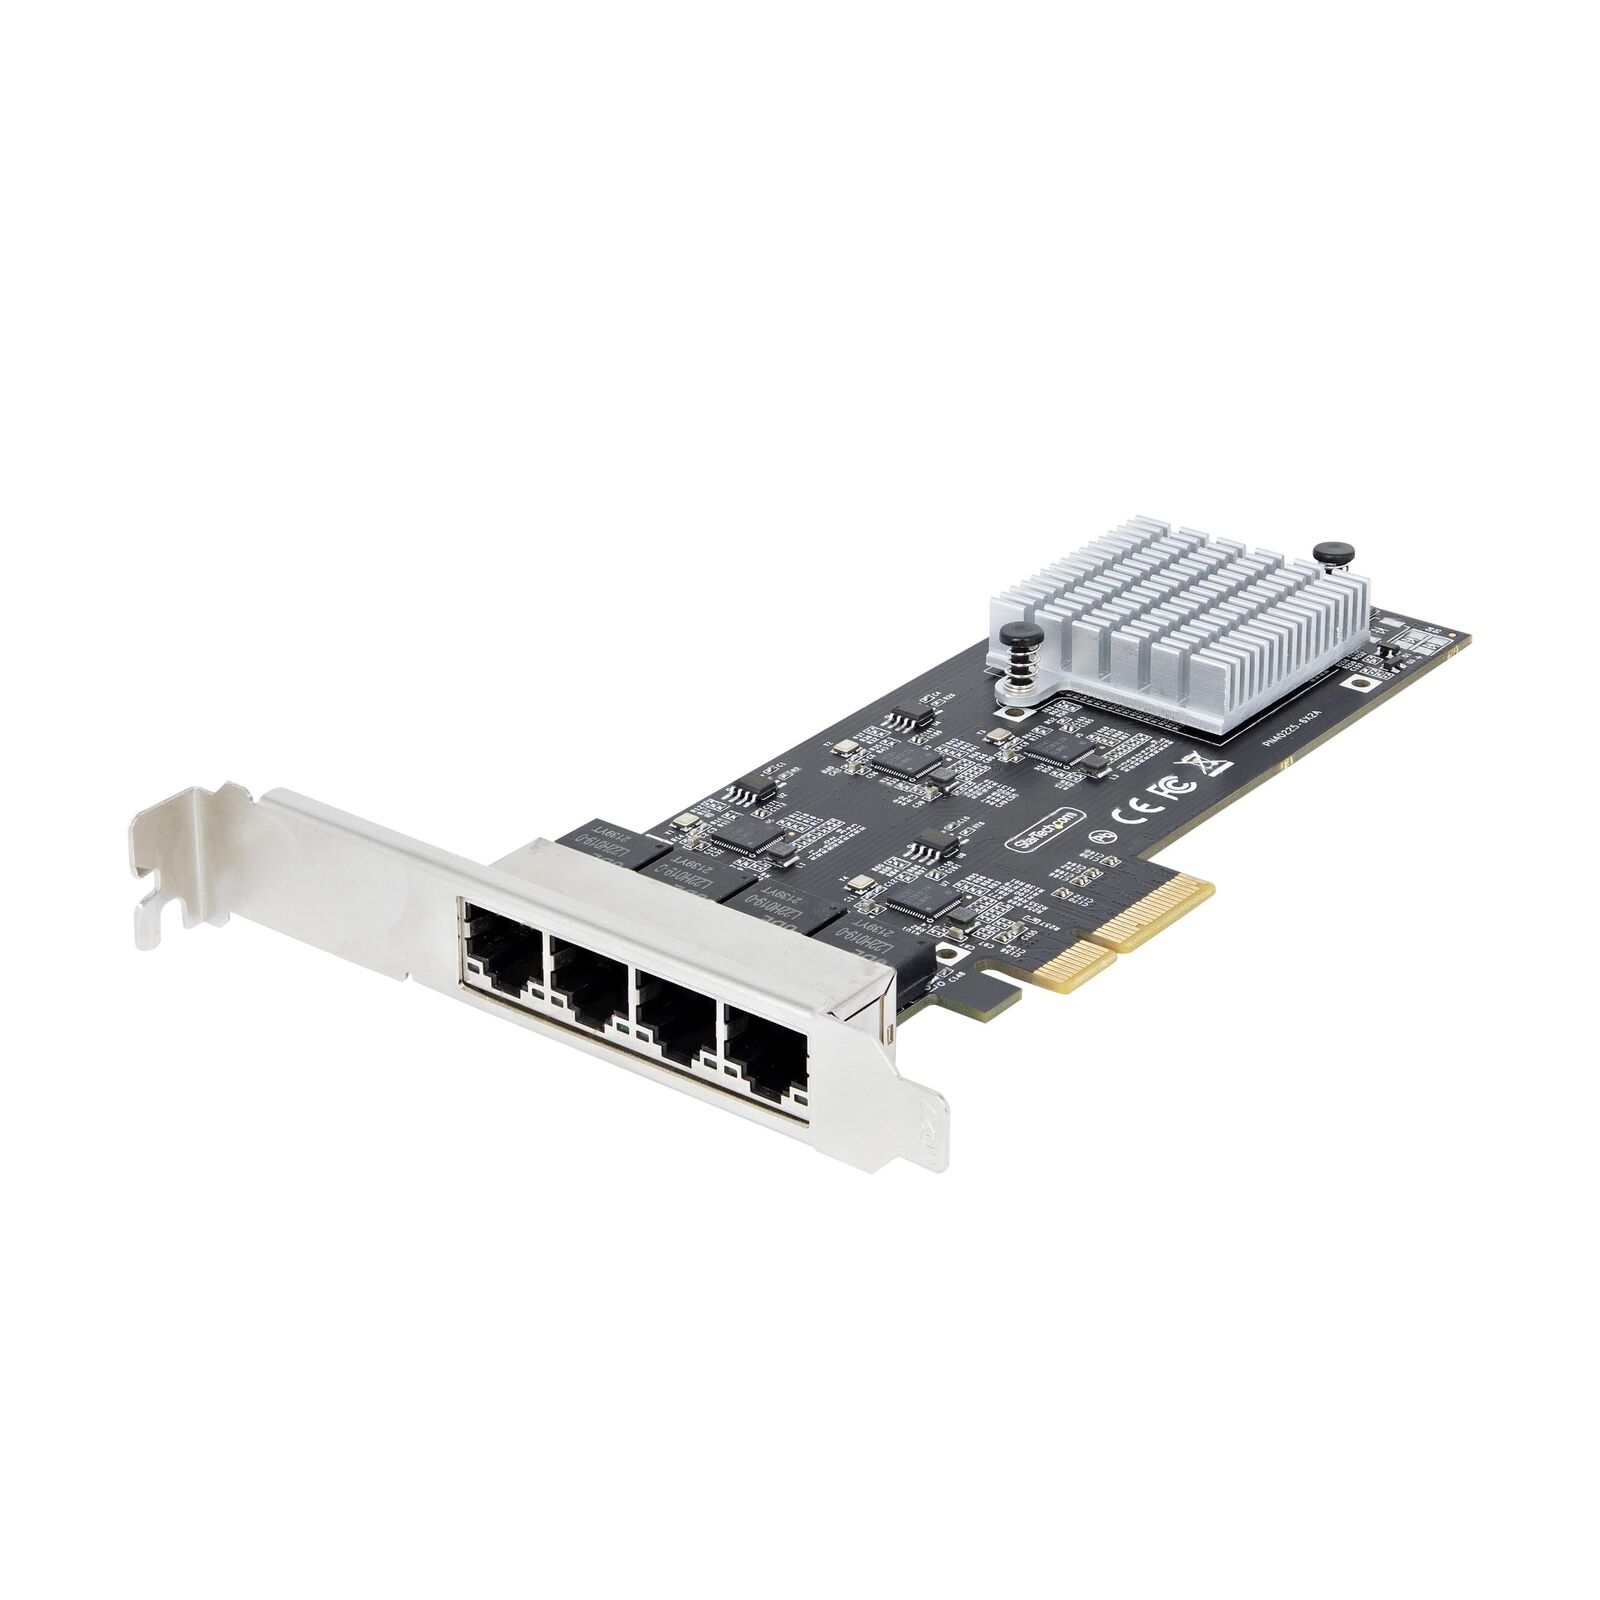 StarTech.com 4-Port 2.5GBase-T Ethernet Network Adapter Card - PCIe 2.0 x4